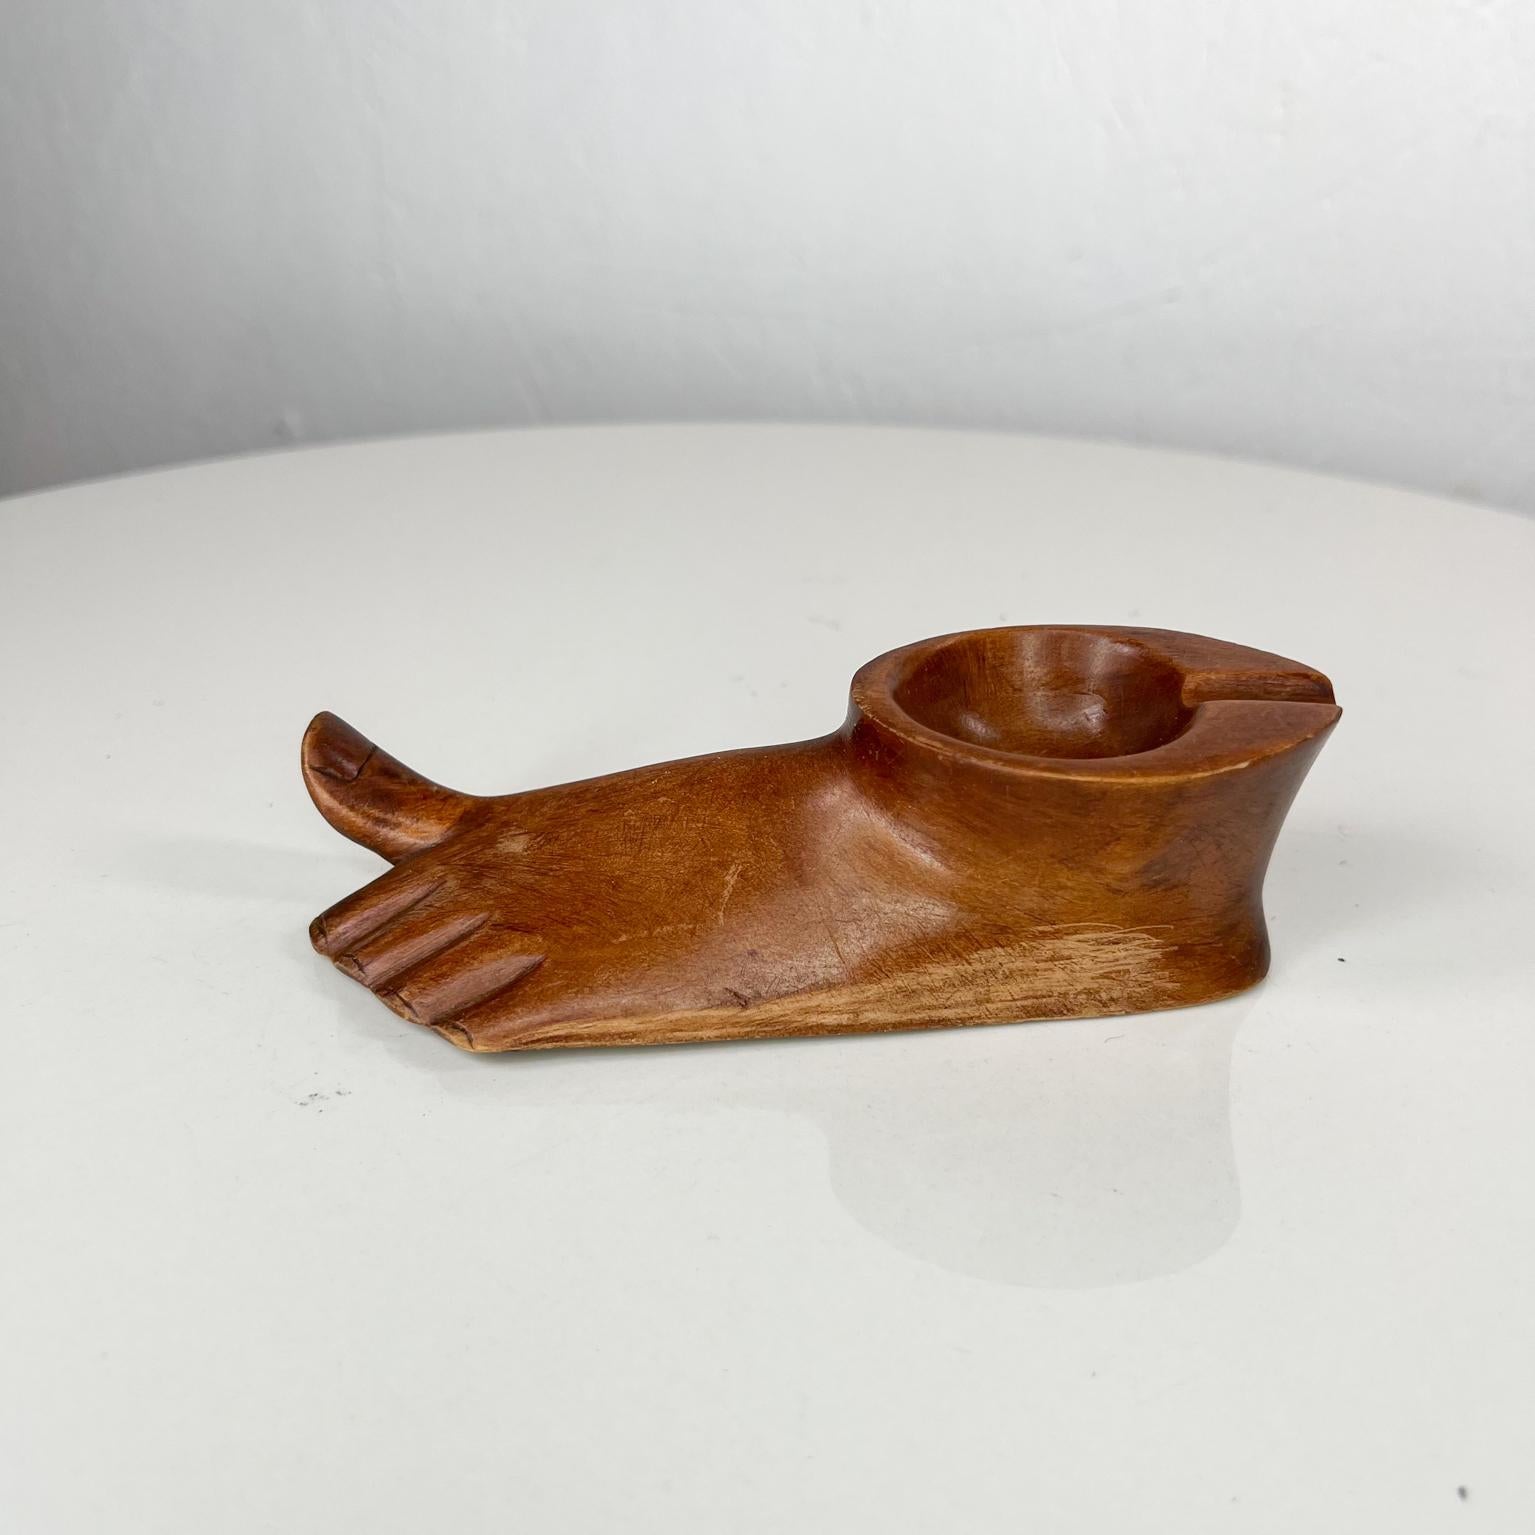 1960s Modernist ashtray pipe holder Hand Carved Wood Foot 
6 x 2.25 w x 1.88 tall
Unrestored original preowned vintage condition
See images provided.